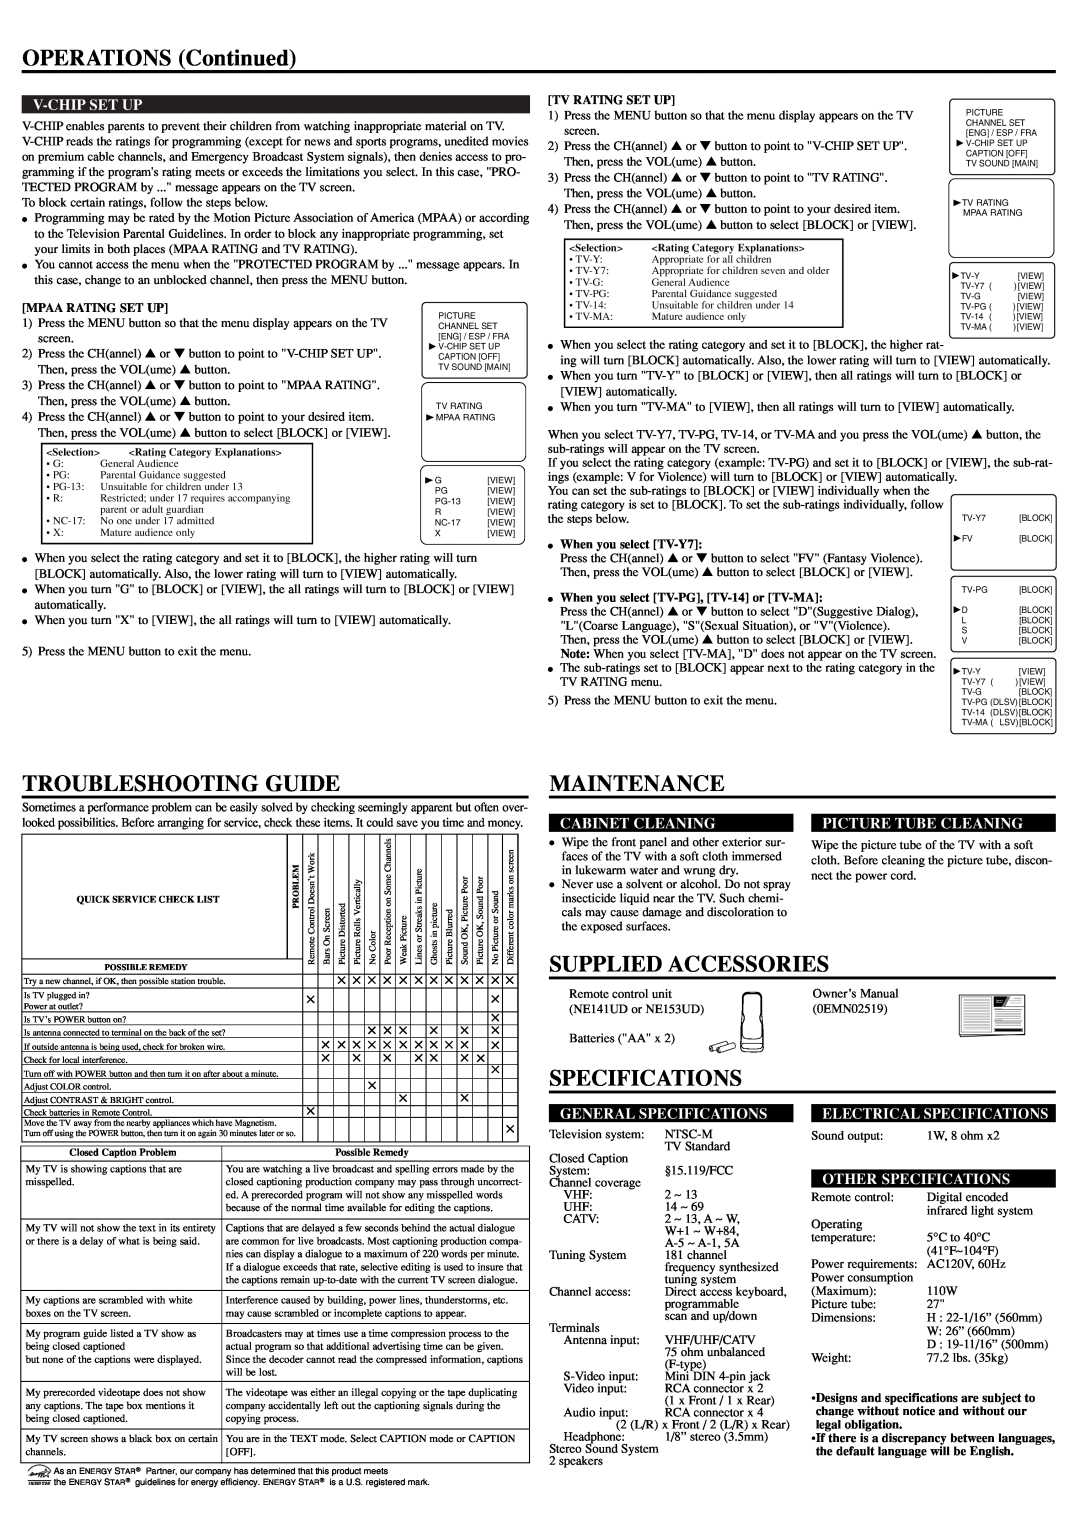 Sylvania RSDCT2704R OPERATIONS Continued, Troubleshooting Guide, Maintenance, Supplied Accessories, Specifications 